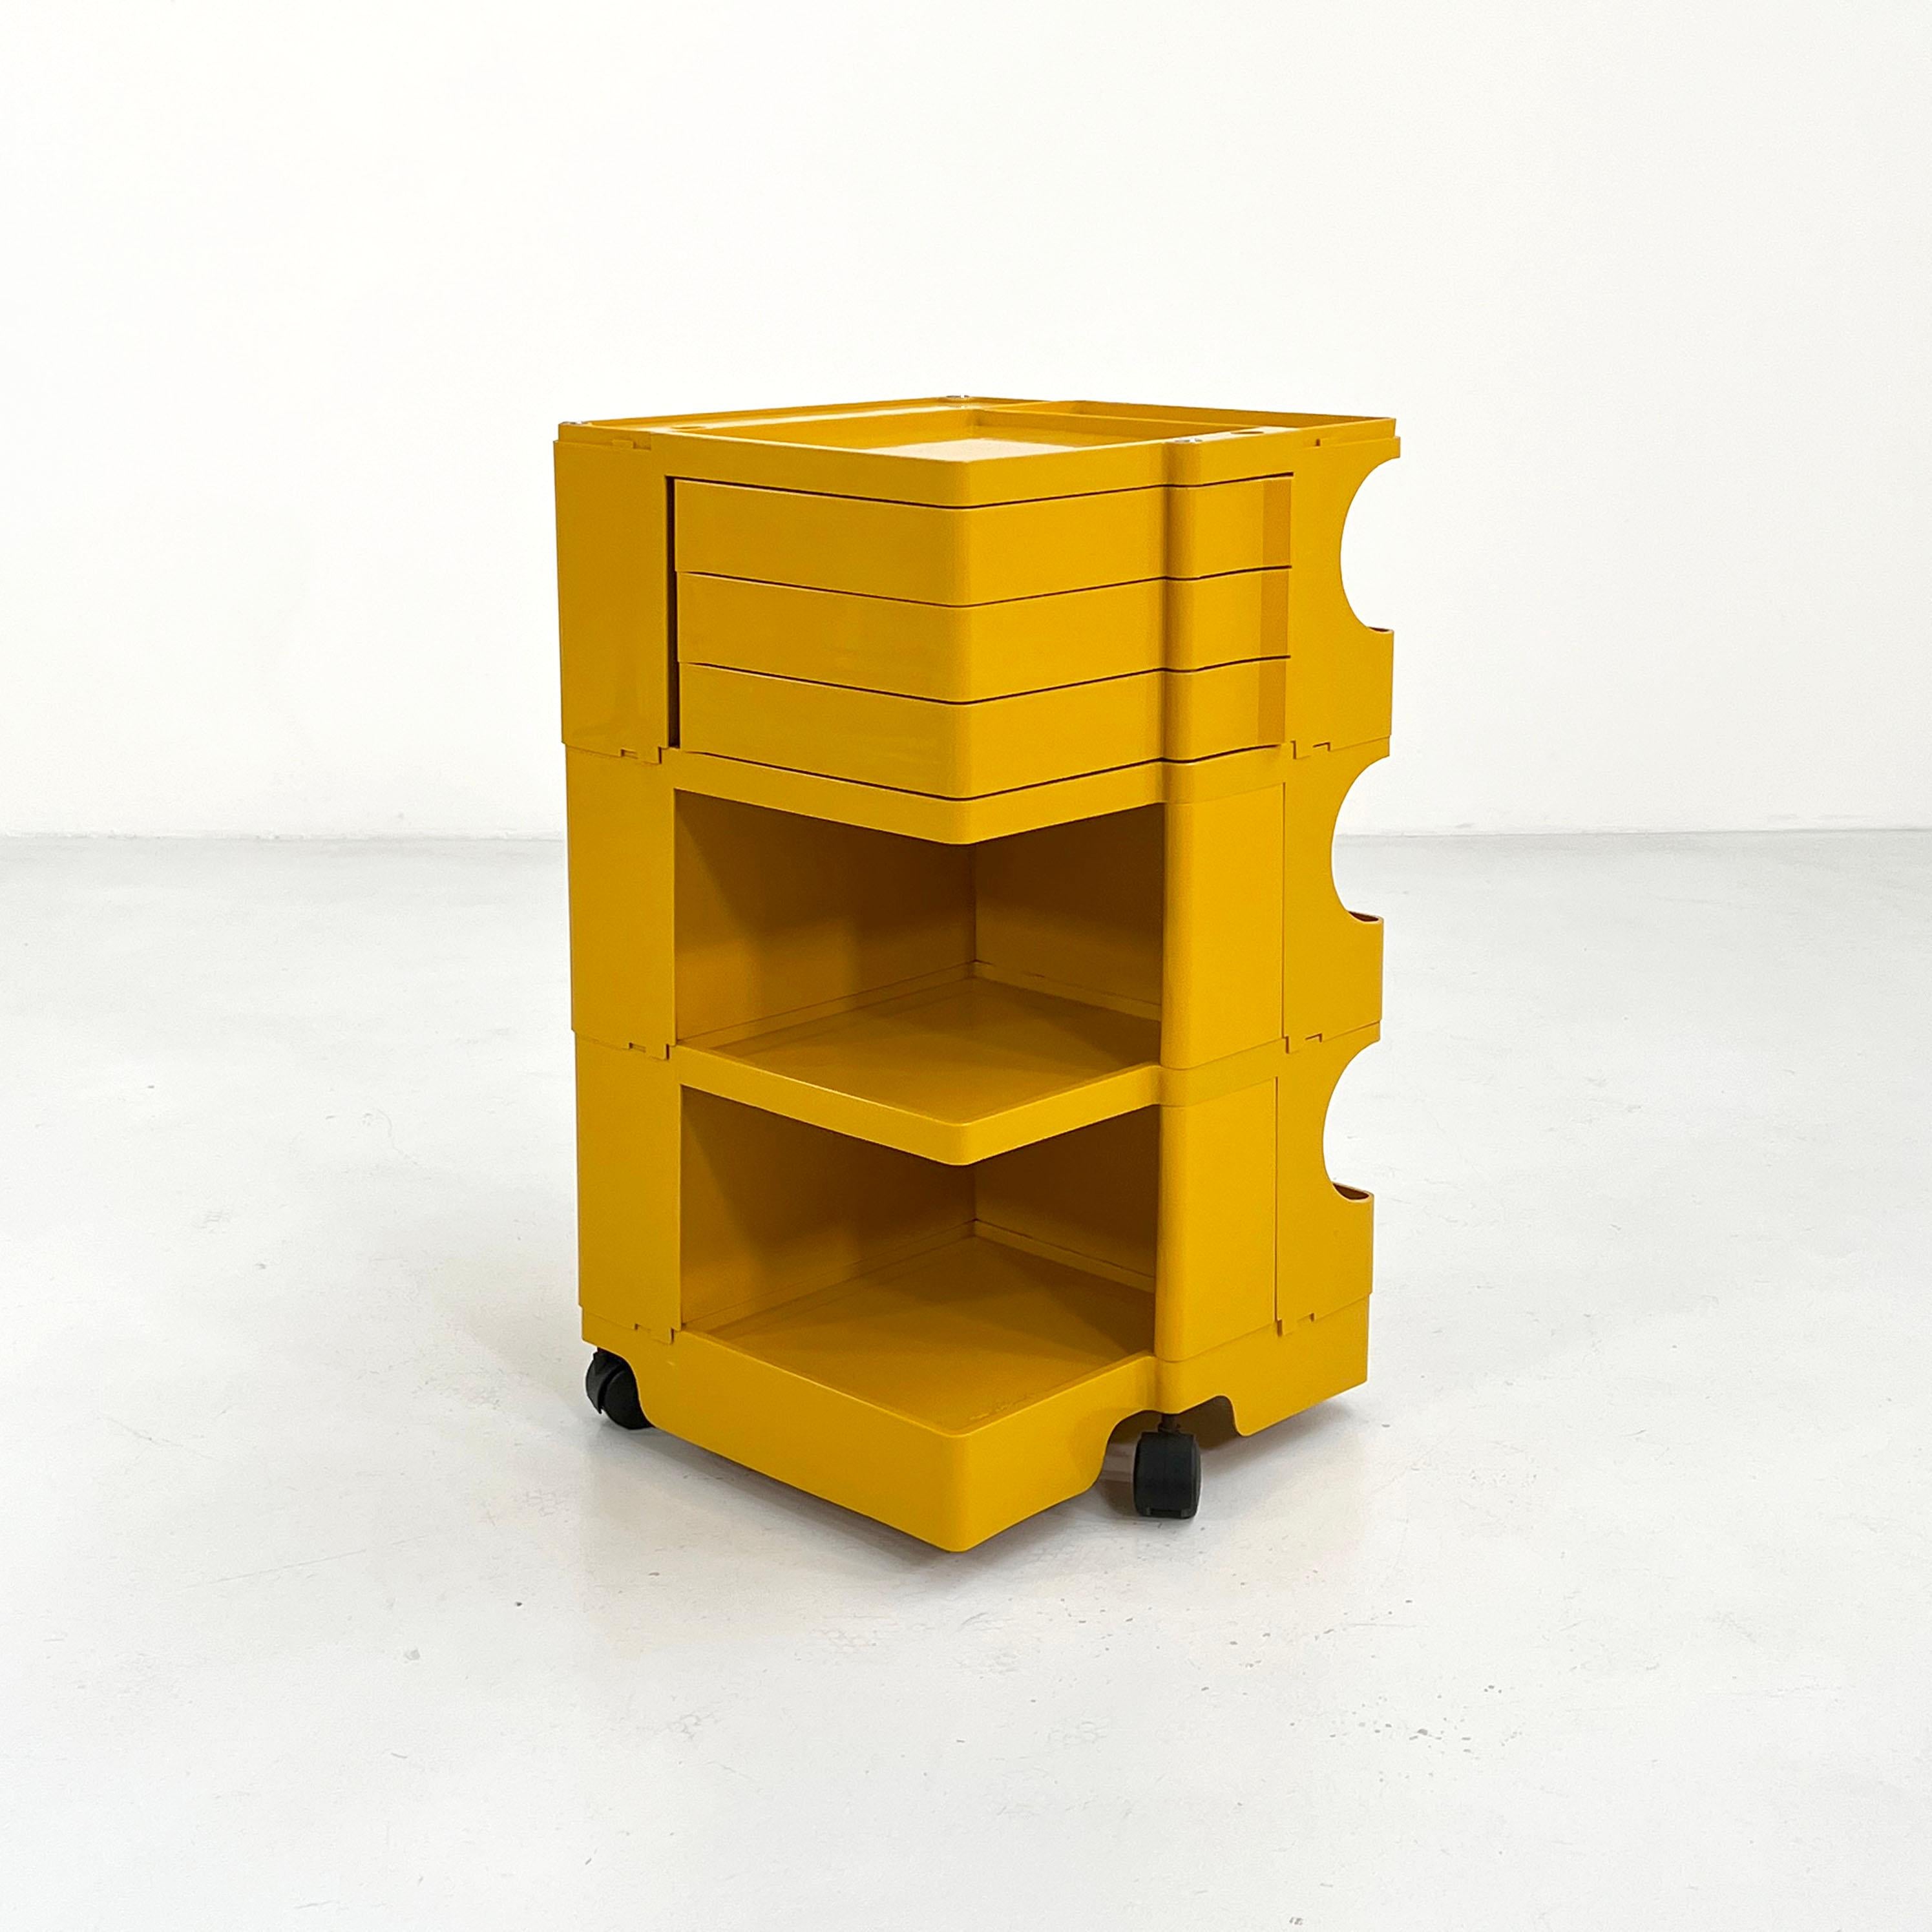 Designer - Joe Colombo 
Producer - Bieffeplast
Model - Boby Trolley
Design Period - Sixties
Measurements - Width 41 cm x Depth 39 cm x Height 74 cm
Materials - Plastic
Color - Yellow
Light wear consistent with age and use.